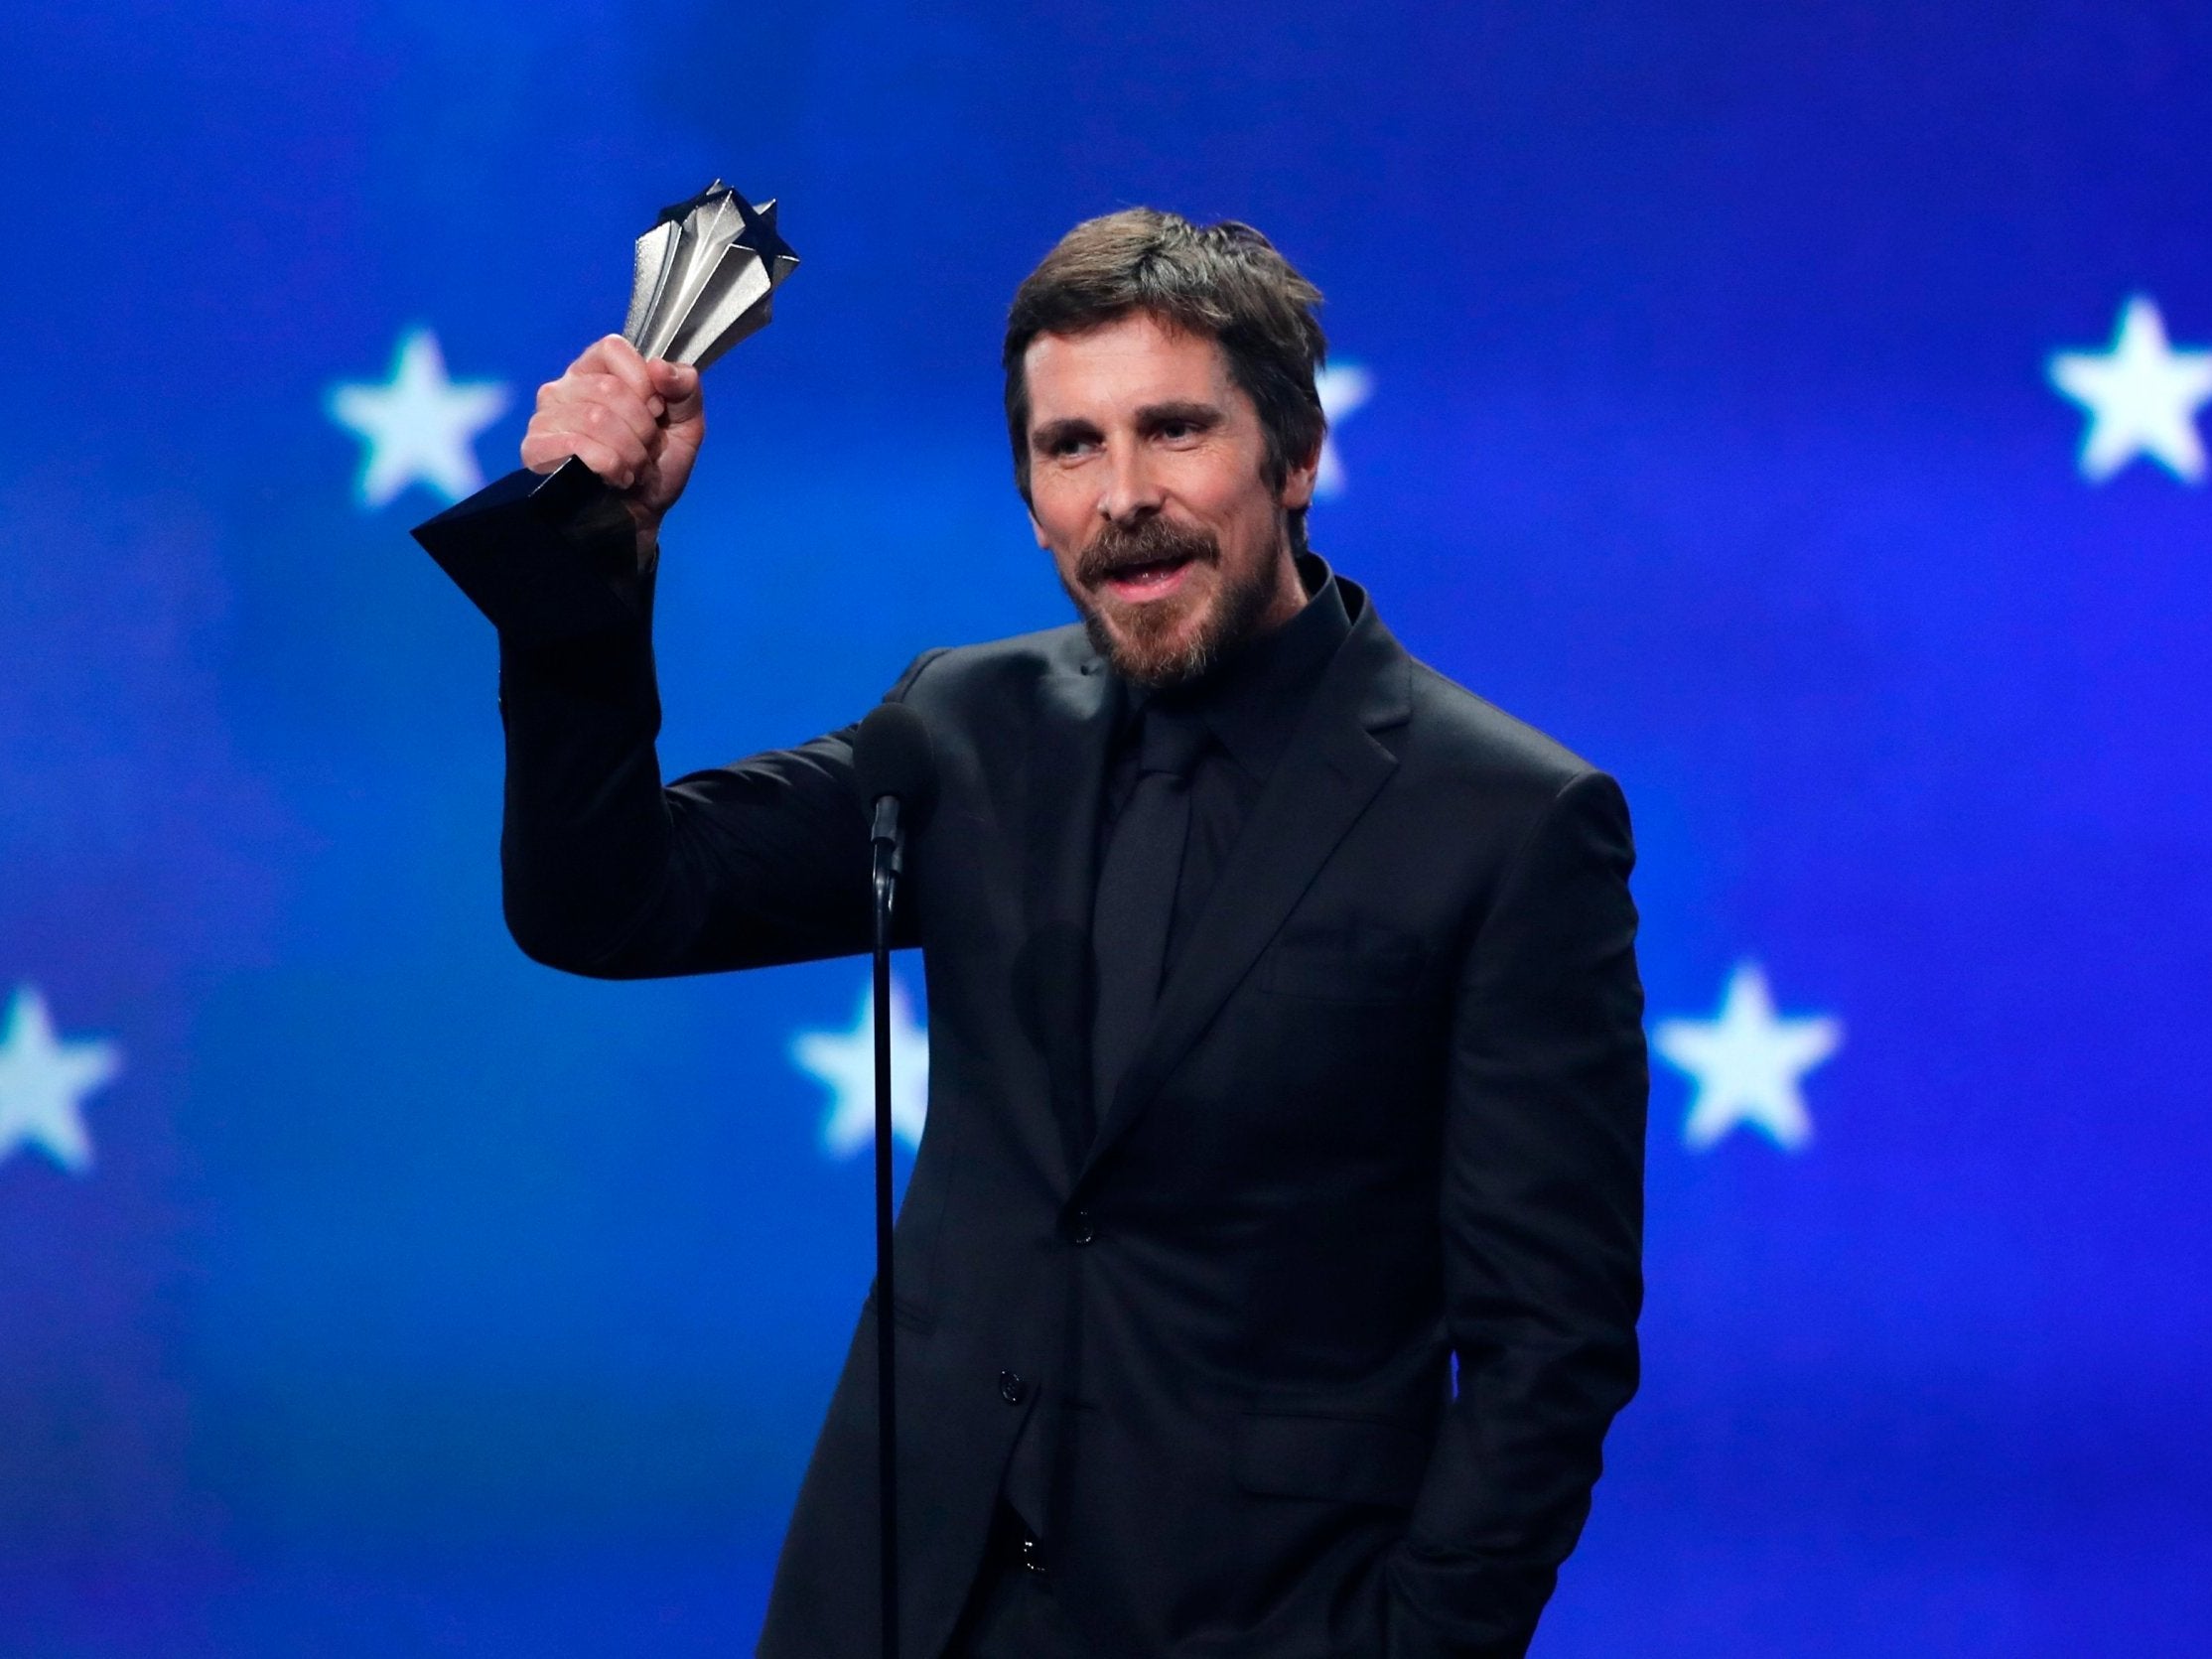 Christian Bale won both Best Actor and Best Actor in a Comedy at the Critics's Choice Awards 2019